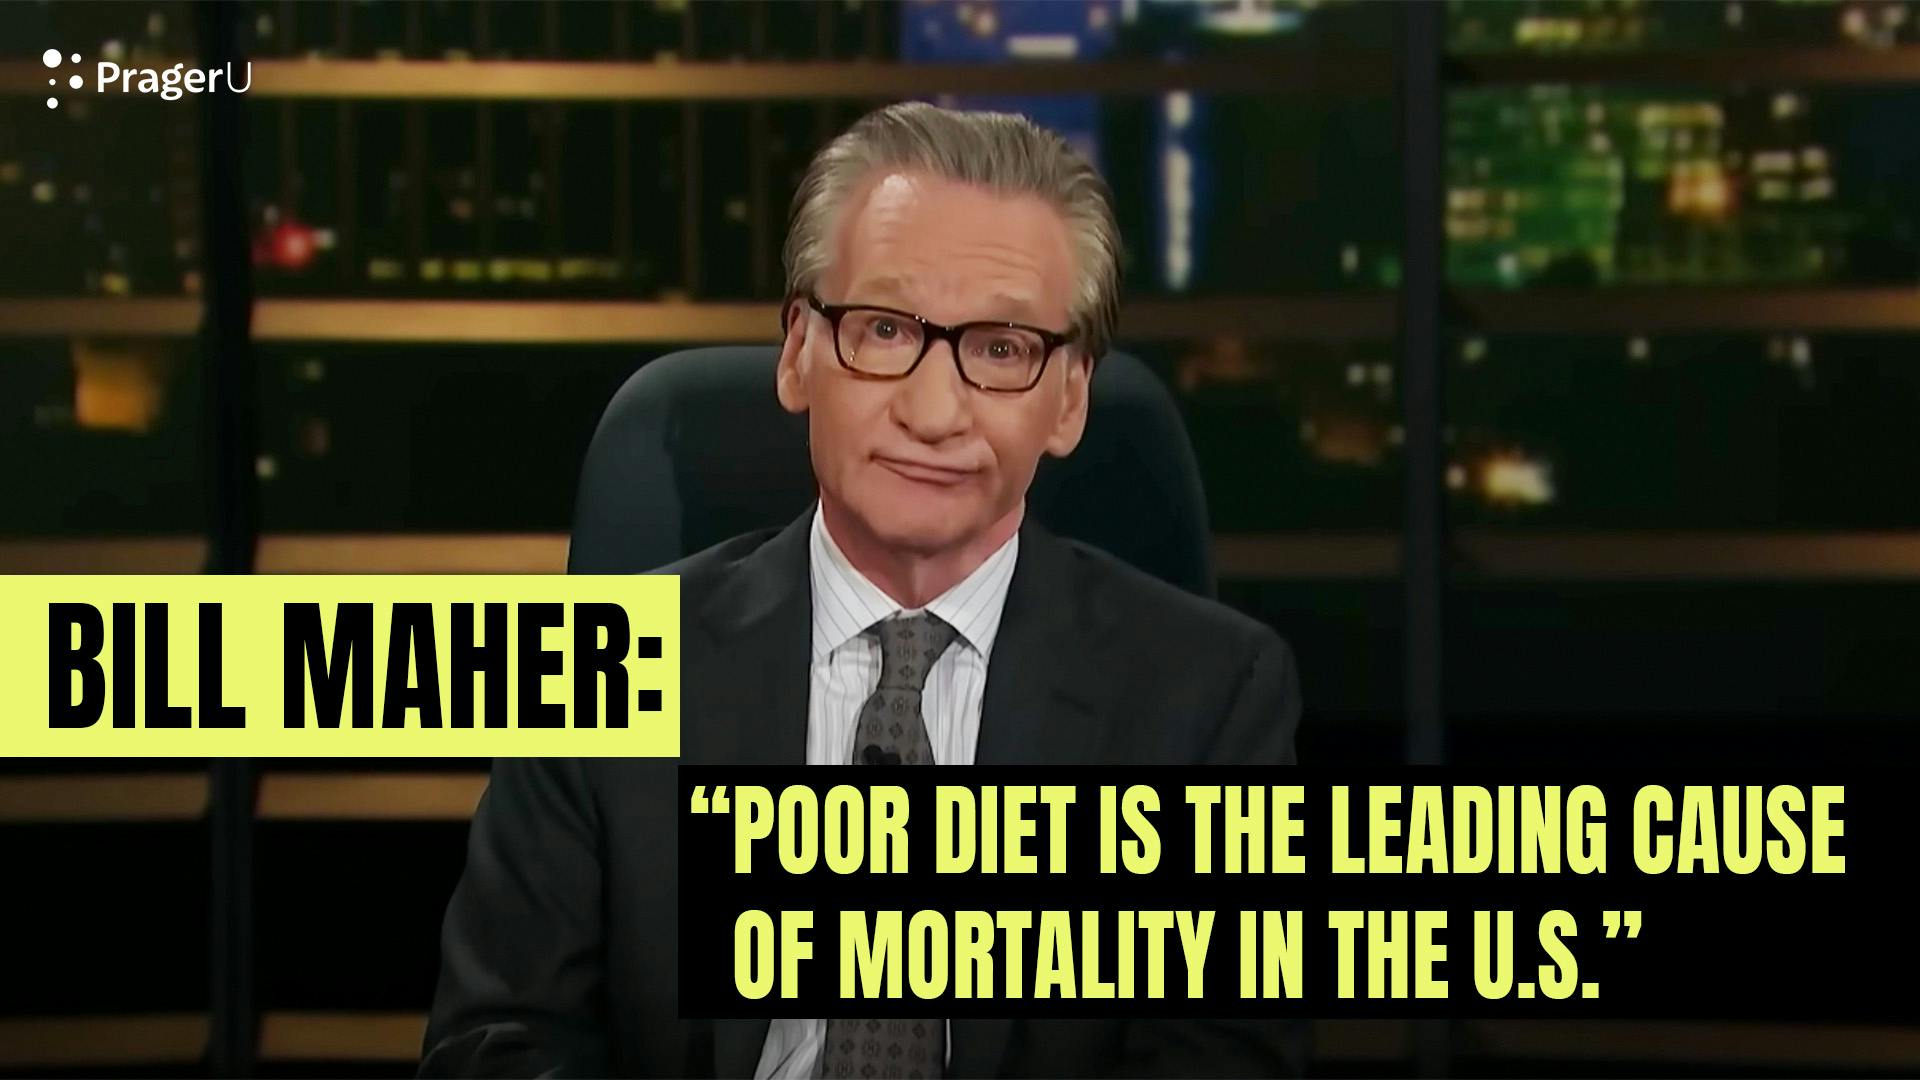 Bill Maher: "Poor Diet is the Leading Cause of Mortality in the U.S."